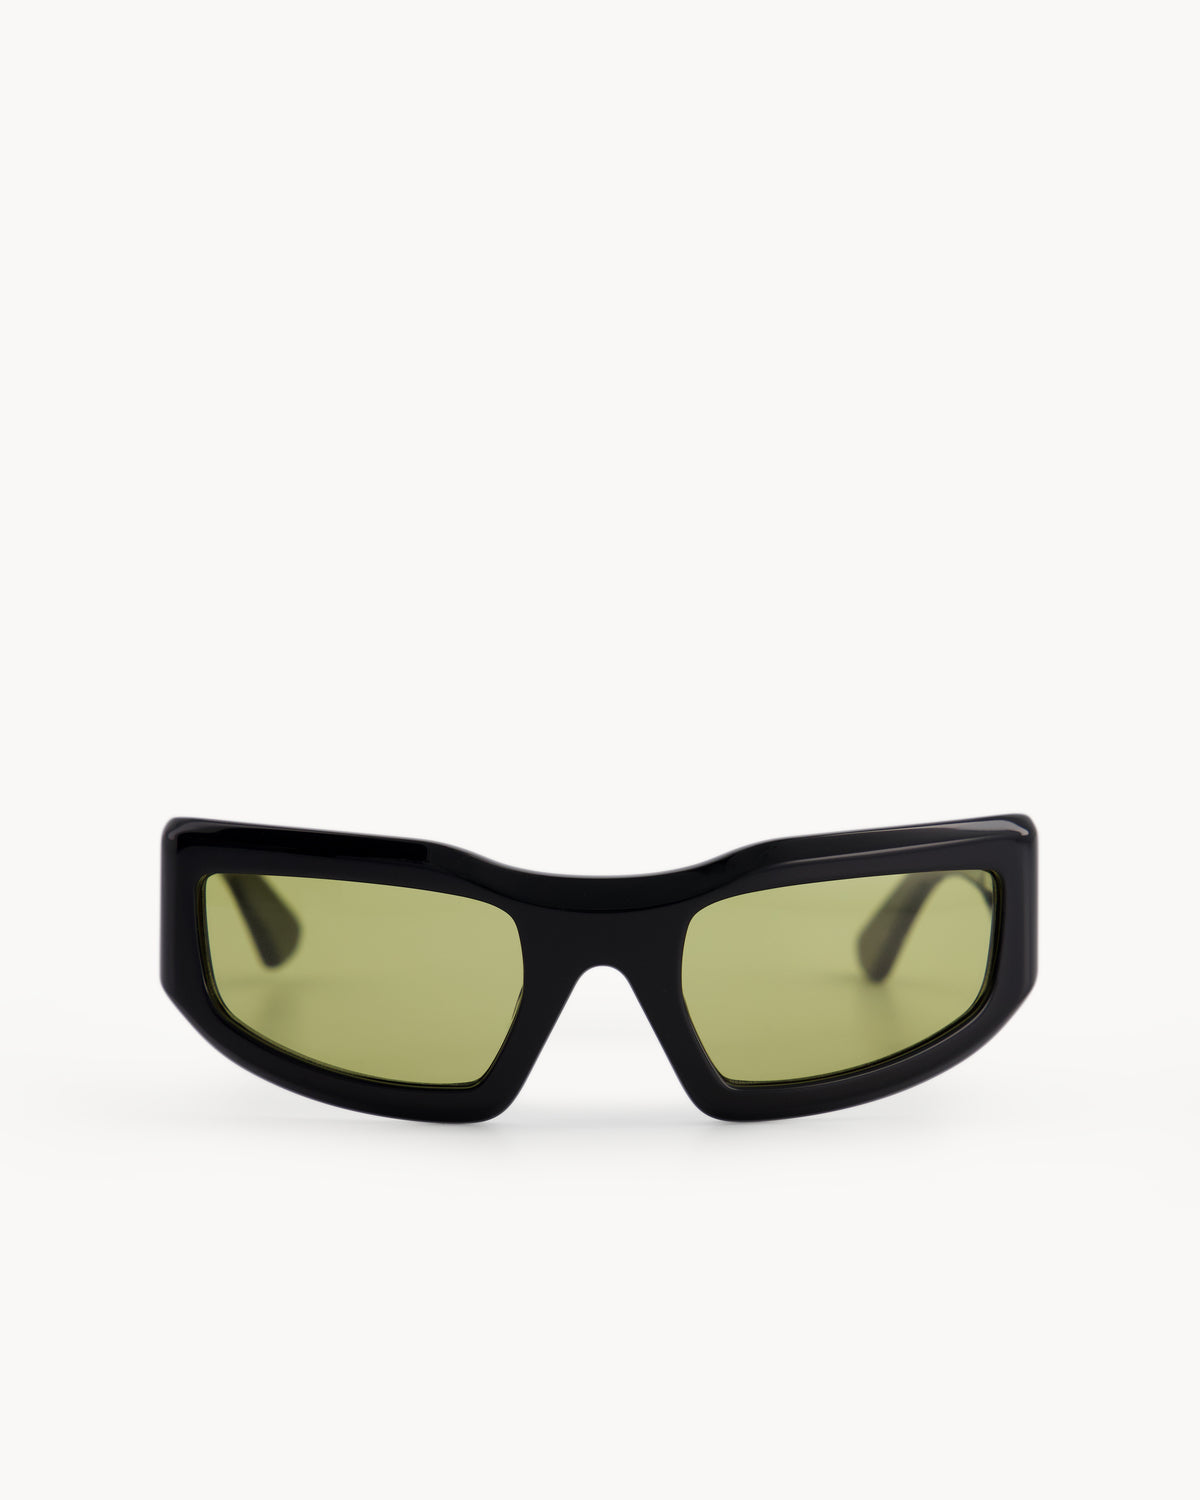 Port Tanger Andalucia Sunglasses in Black Acetate and Warm Olive Lenses 1